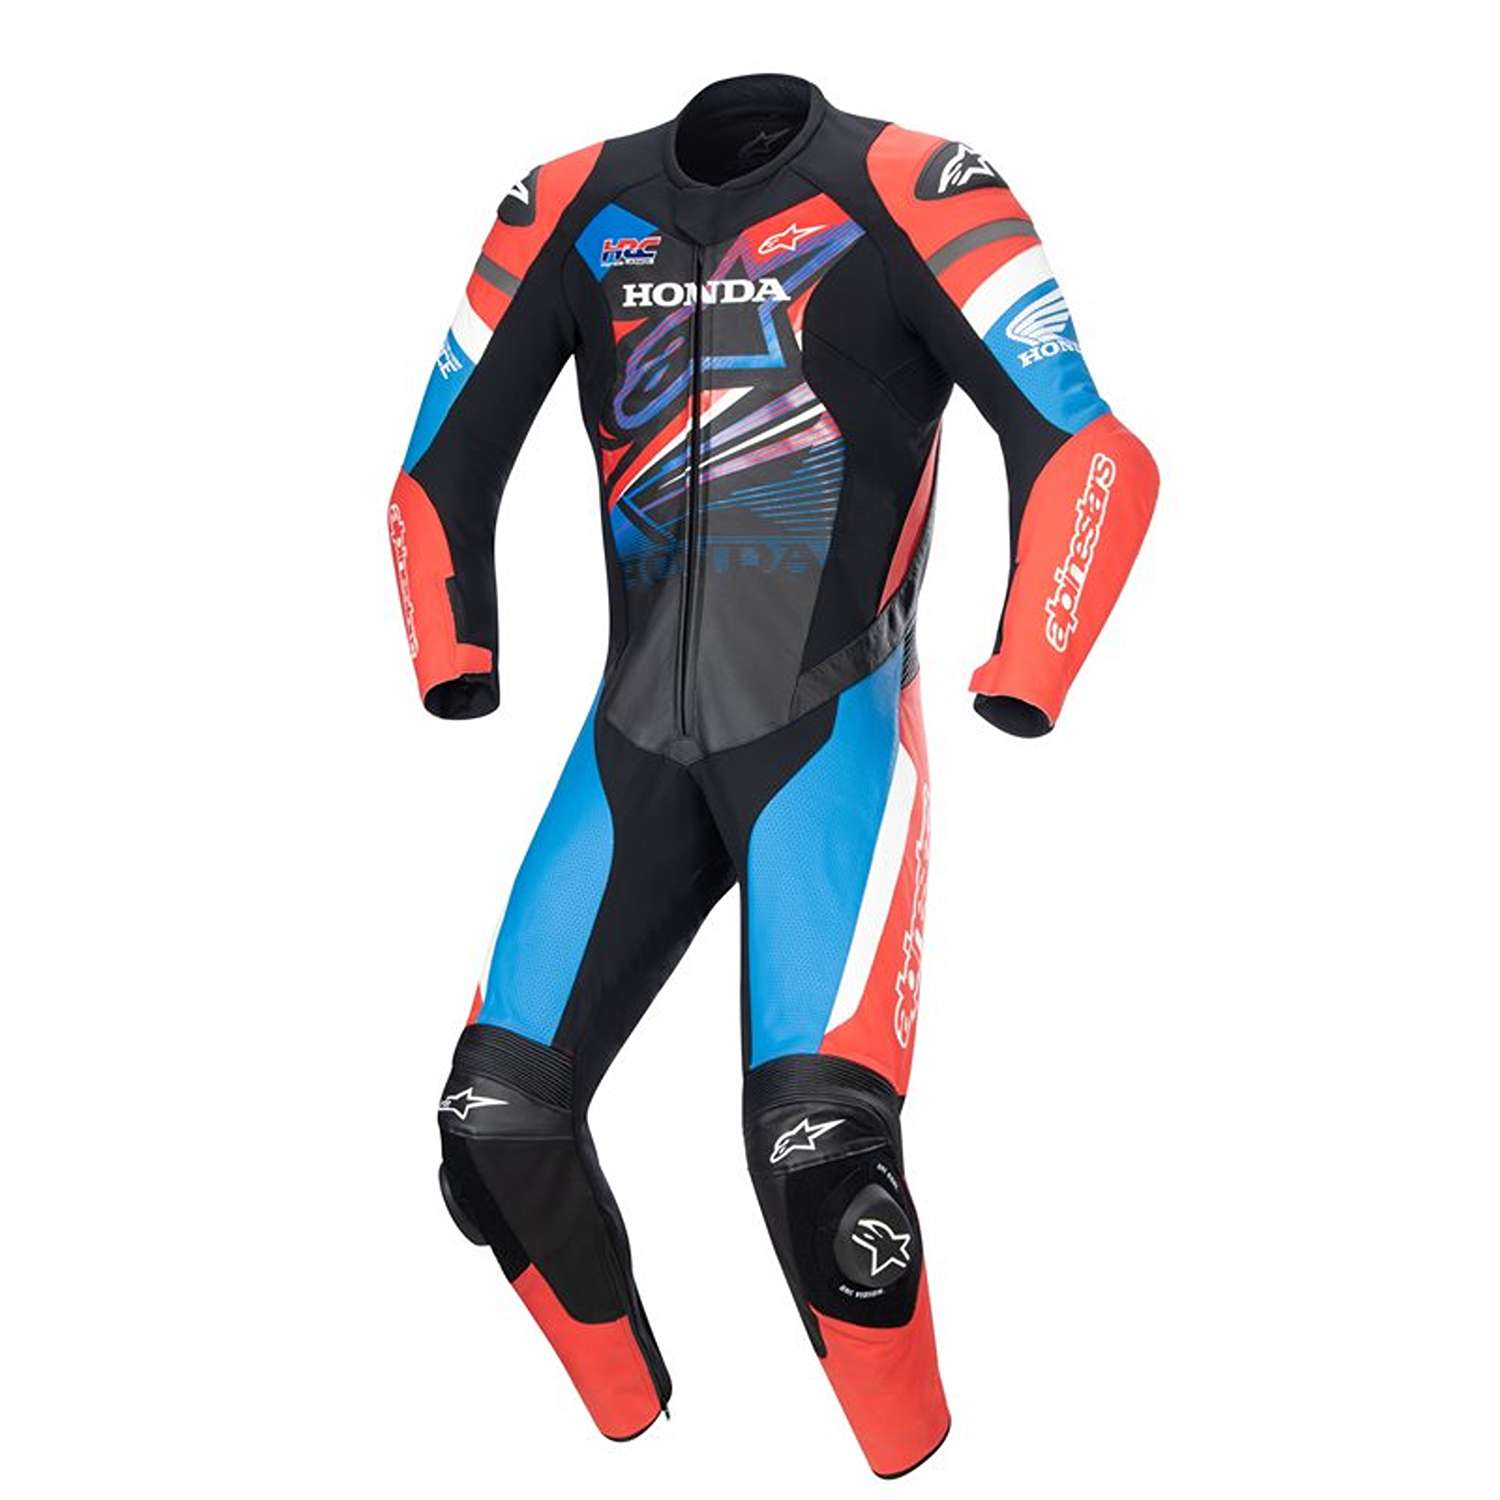 Image of Alpinestars Honda Gp Force Leather Suit Black Bright Red Blue Taille 52